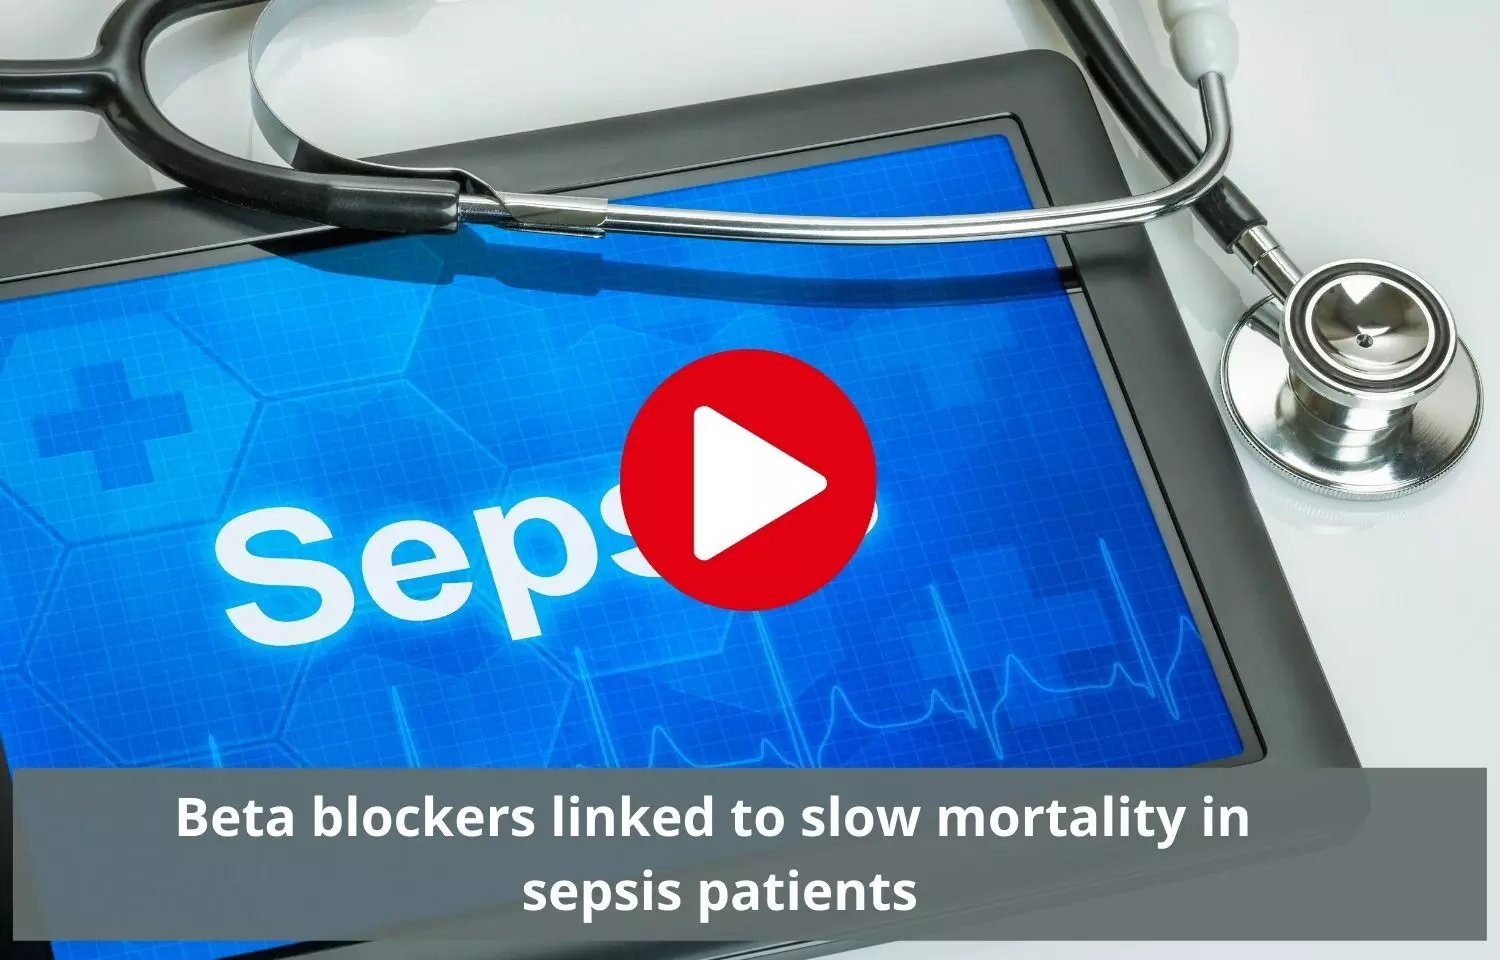 Beta blockers tied to slow mortality in sepsis patients